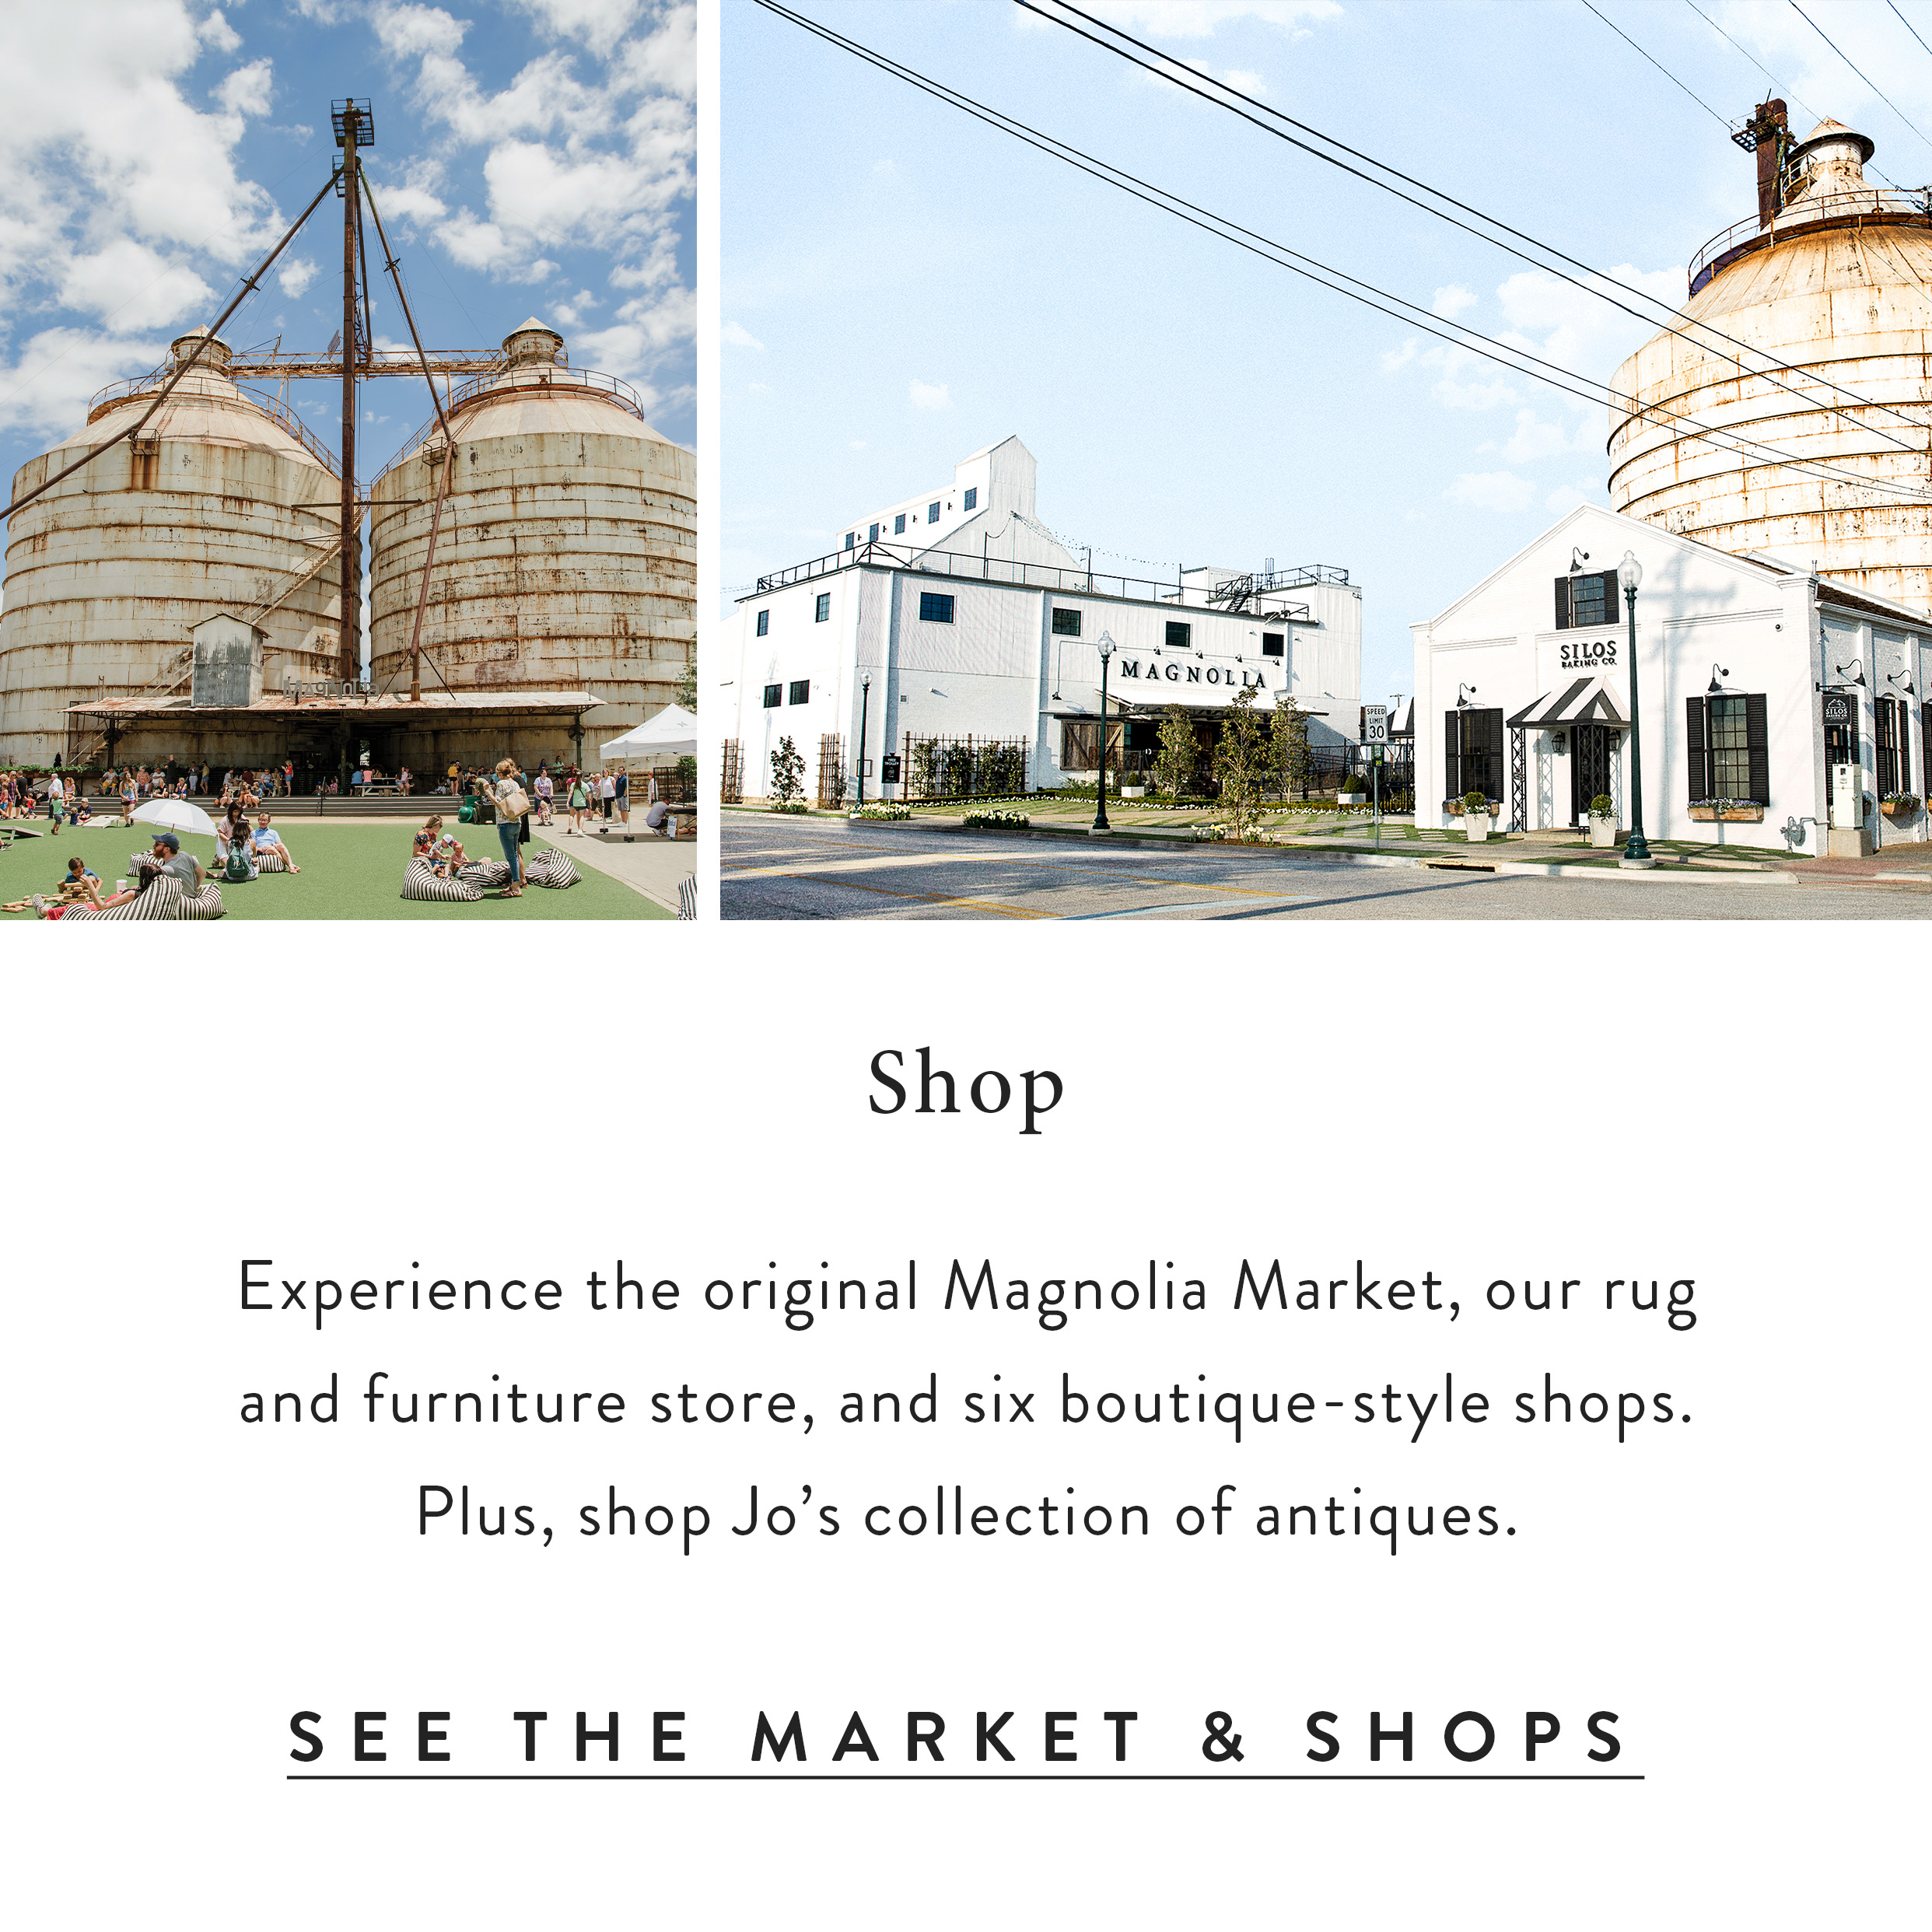 Two photos of the Magnolia Silos next to each other. Text reads - Experience the original Magnolia Market, our rug and furniture store, and six boutique-style shops. Plus, shop Jo's collection of antiques. See the market and shops. 